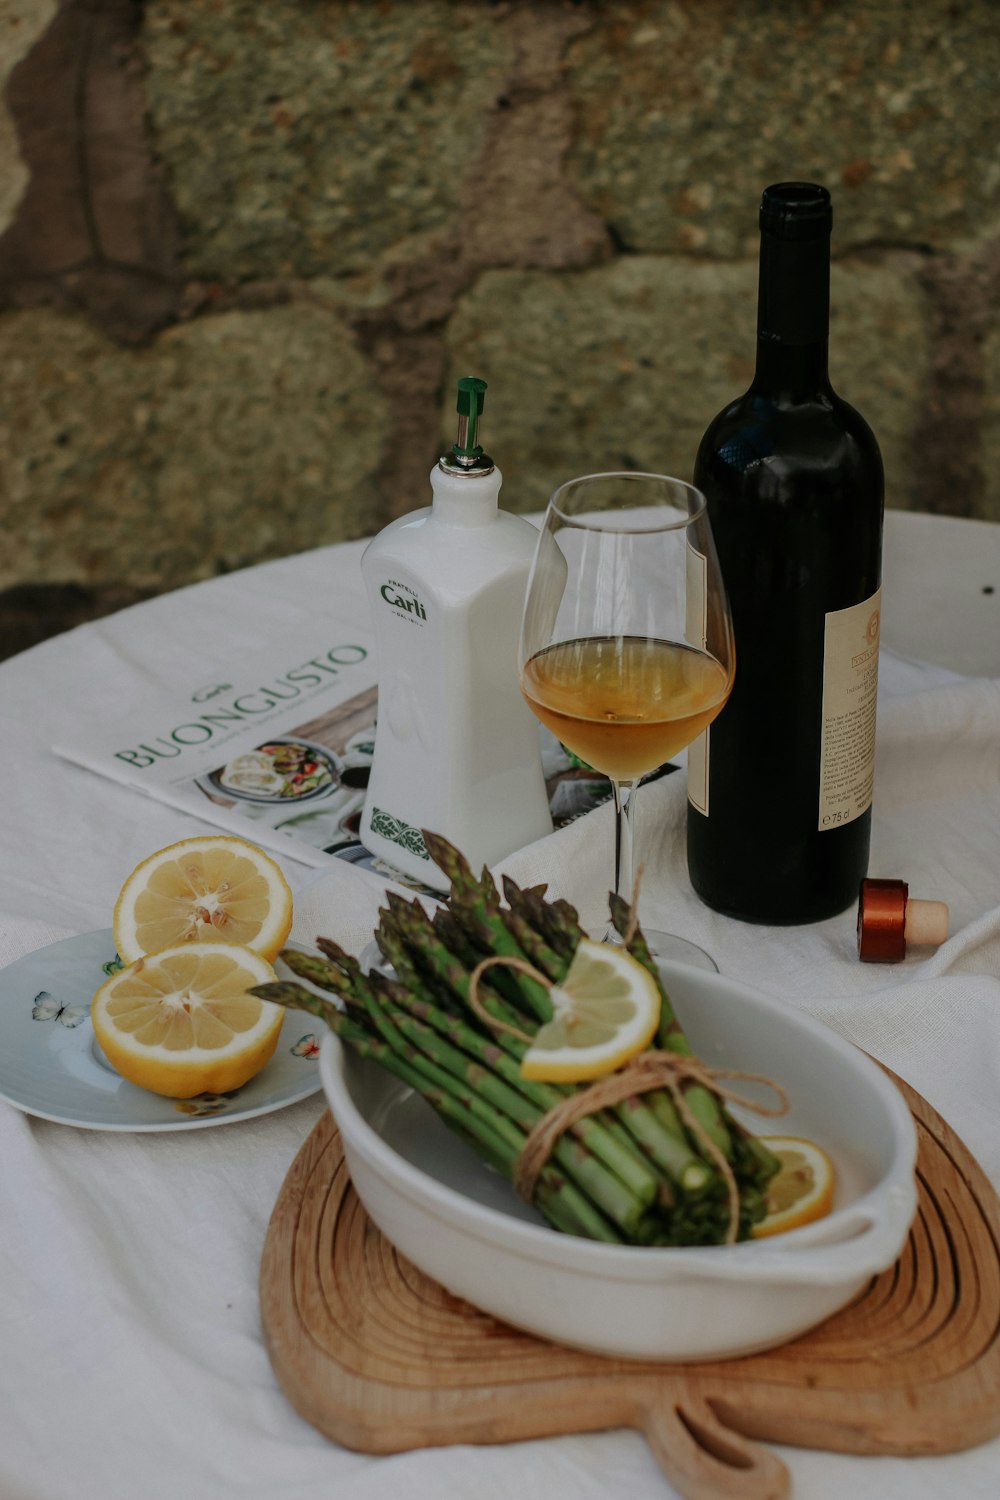 a bowl of asparagus and a glass of wine on a table